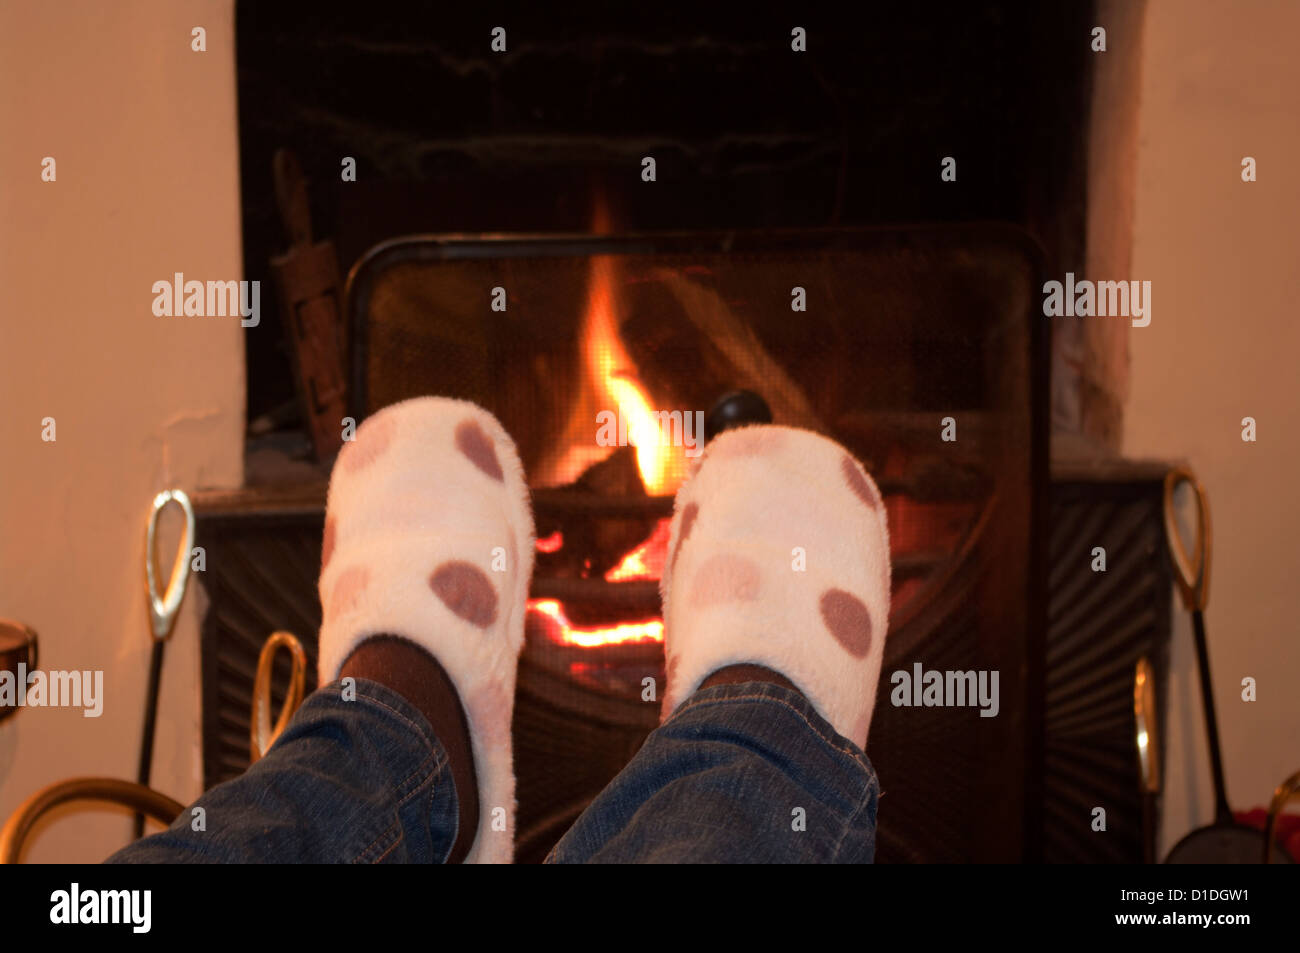 Warming Feet In Slippers By An Open Fire Stock Photo